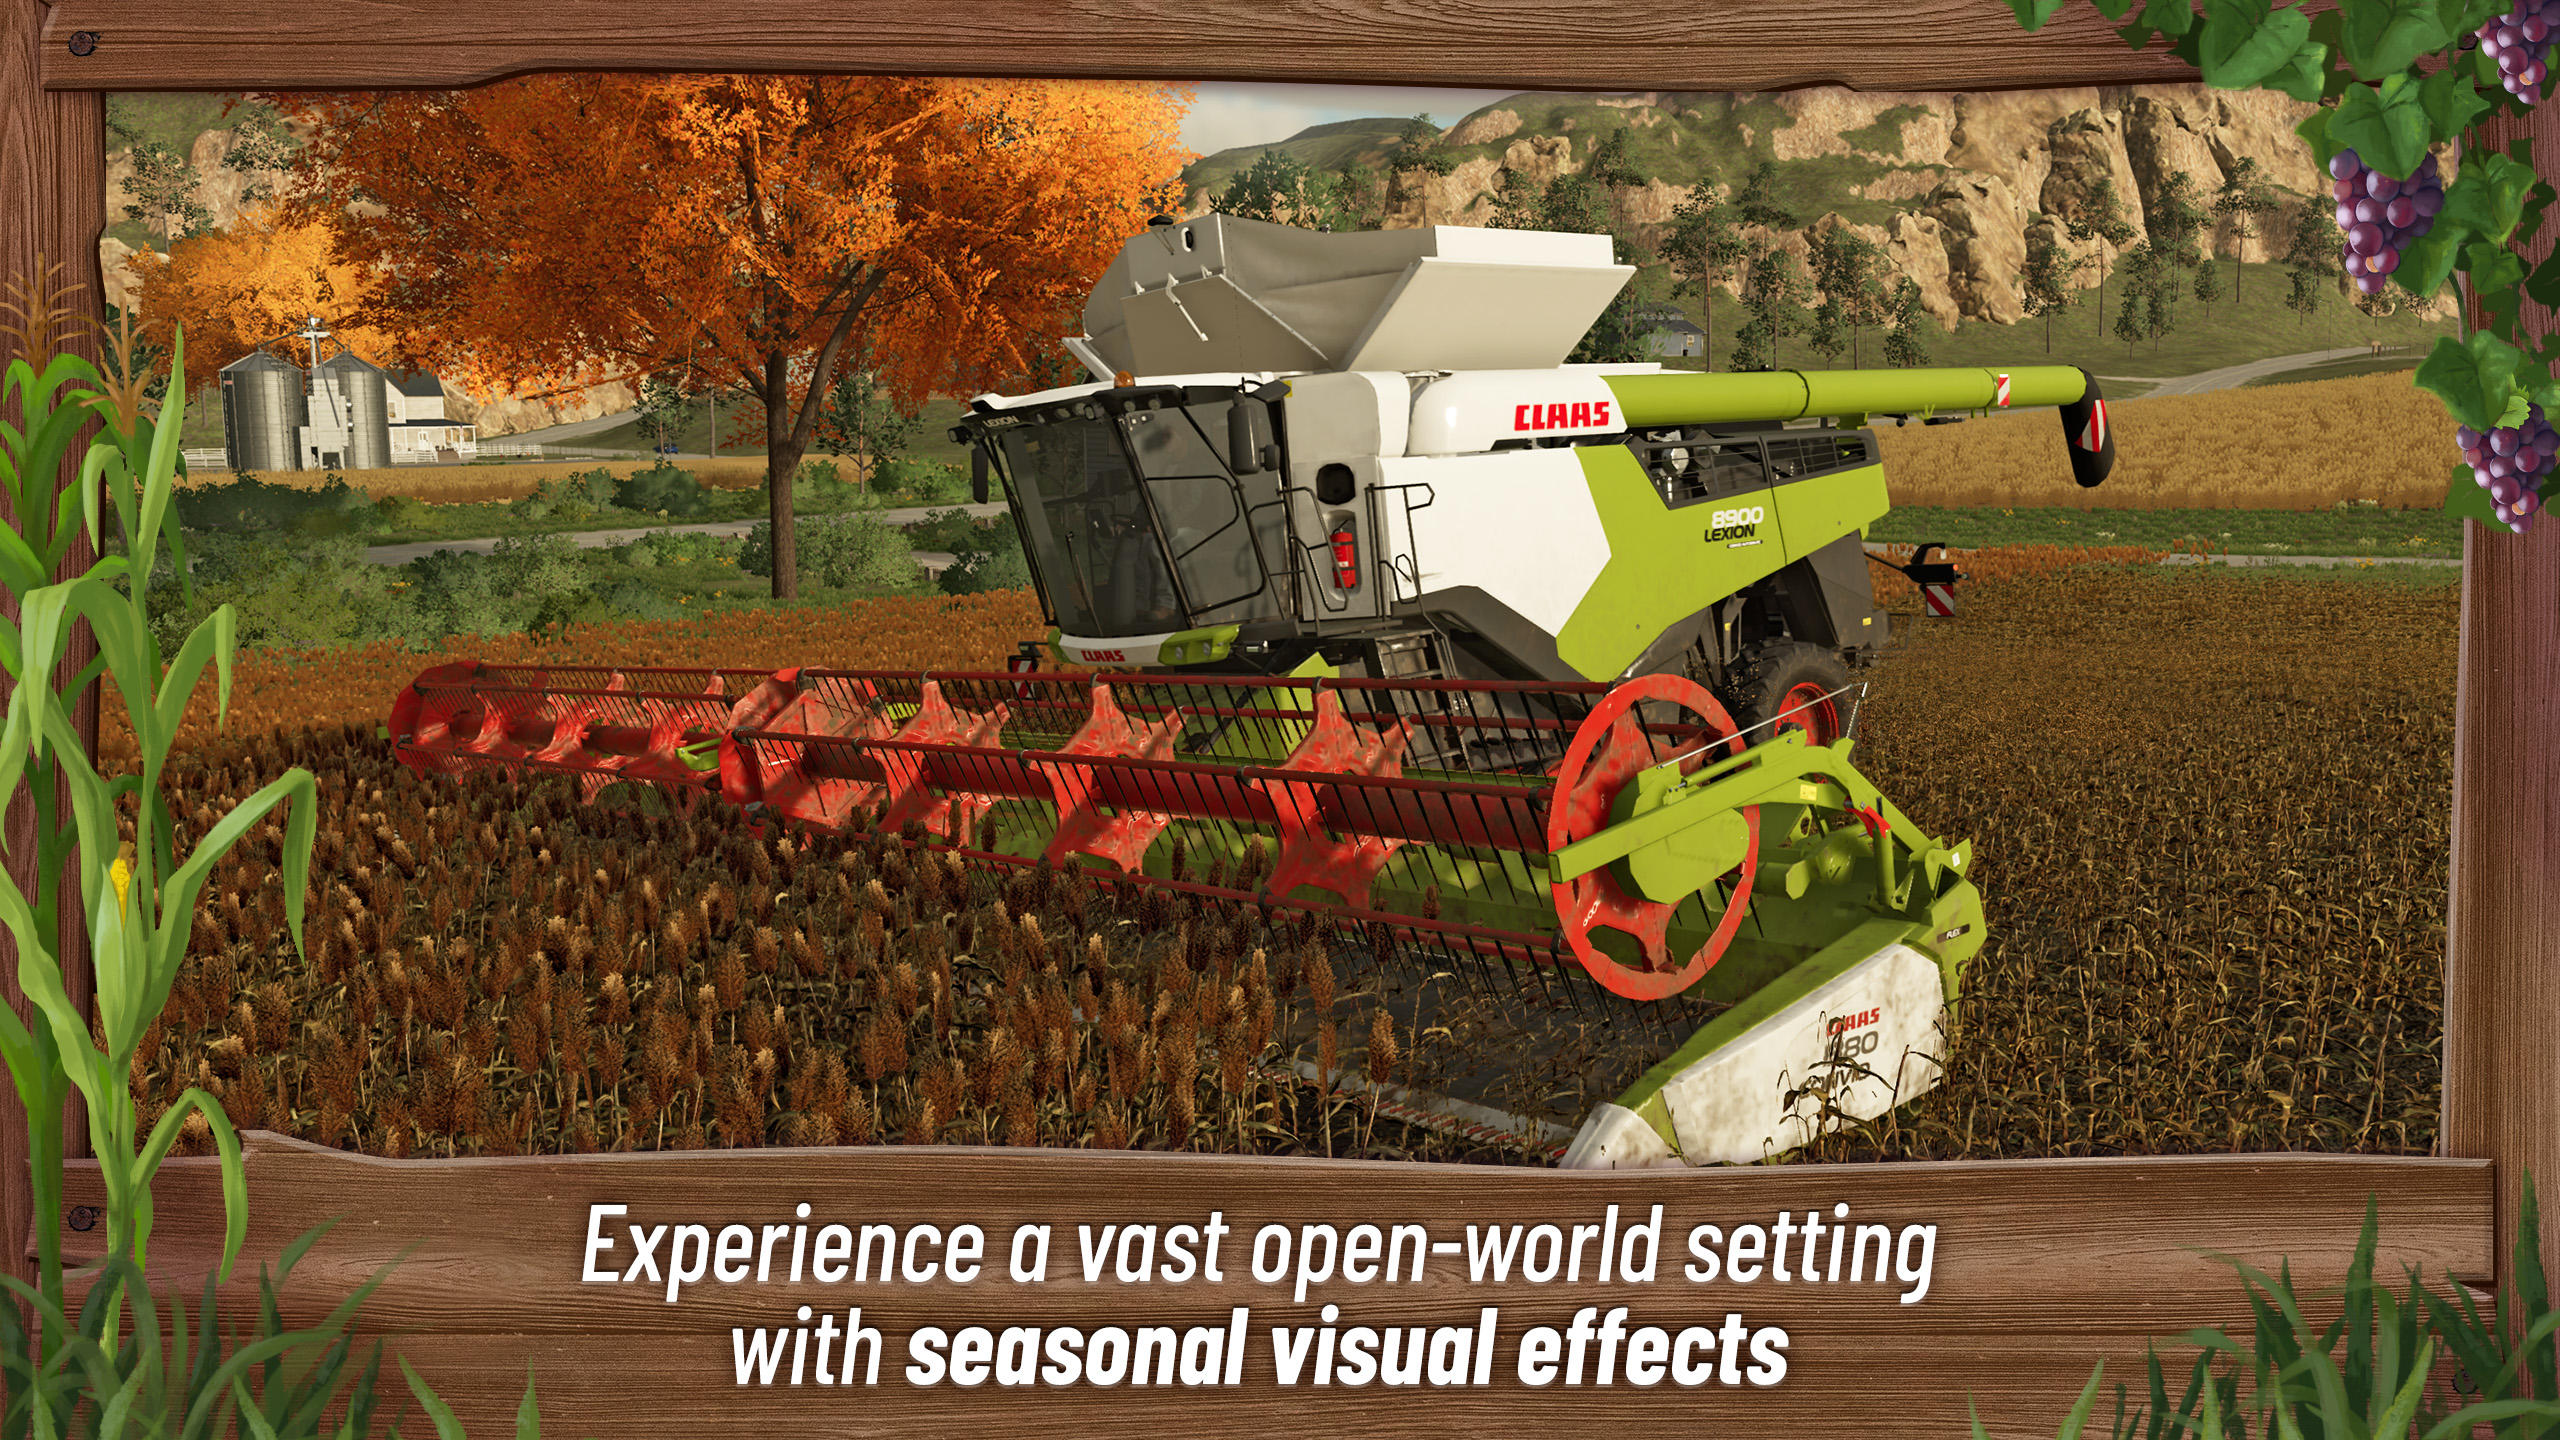 Farming Simulator 23: the agricultural simulation game is back on